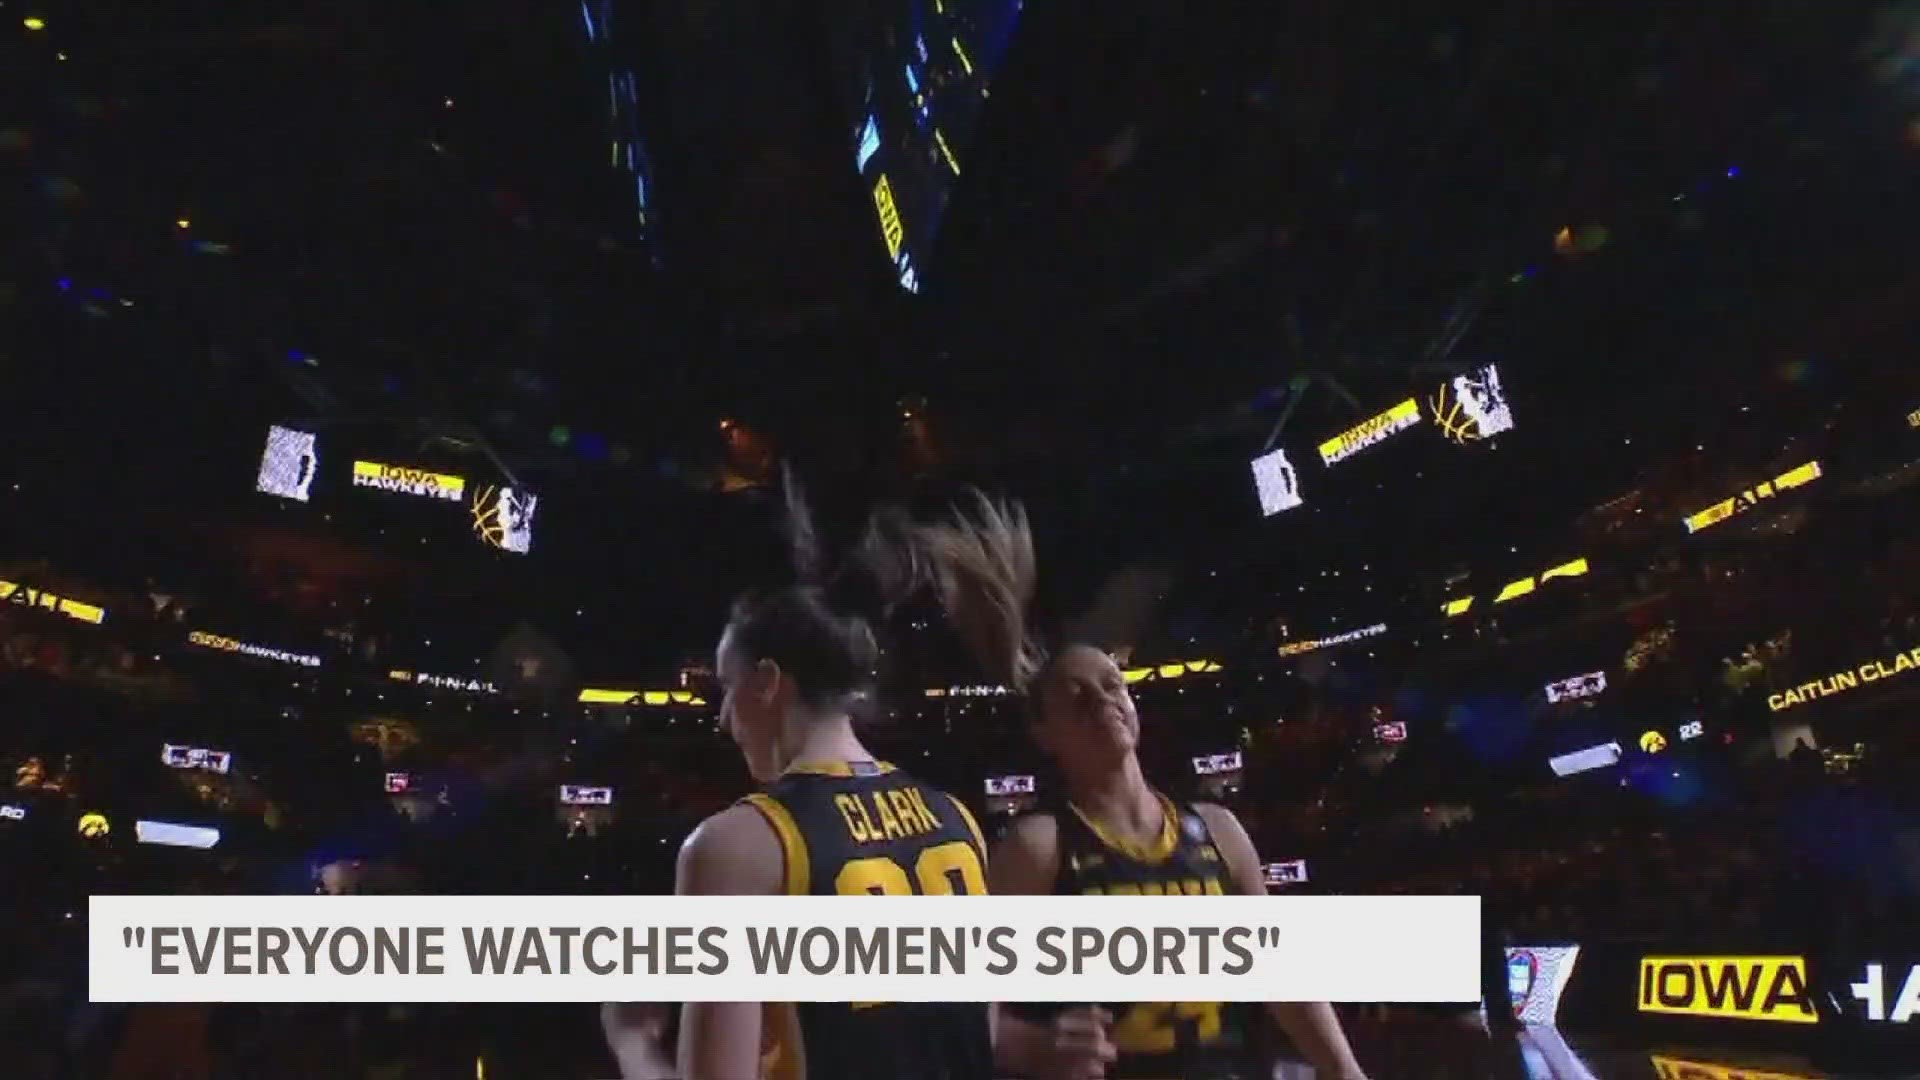 The NCAA Women's Basketball game between South Carolina and Iowa drew an average of about 19 million viewers, peaking at 24 million, according to ESPN.